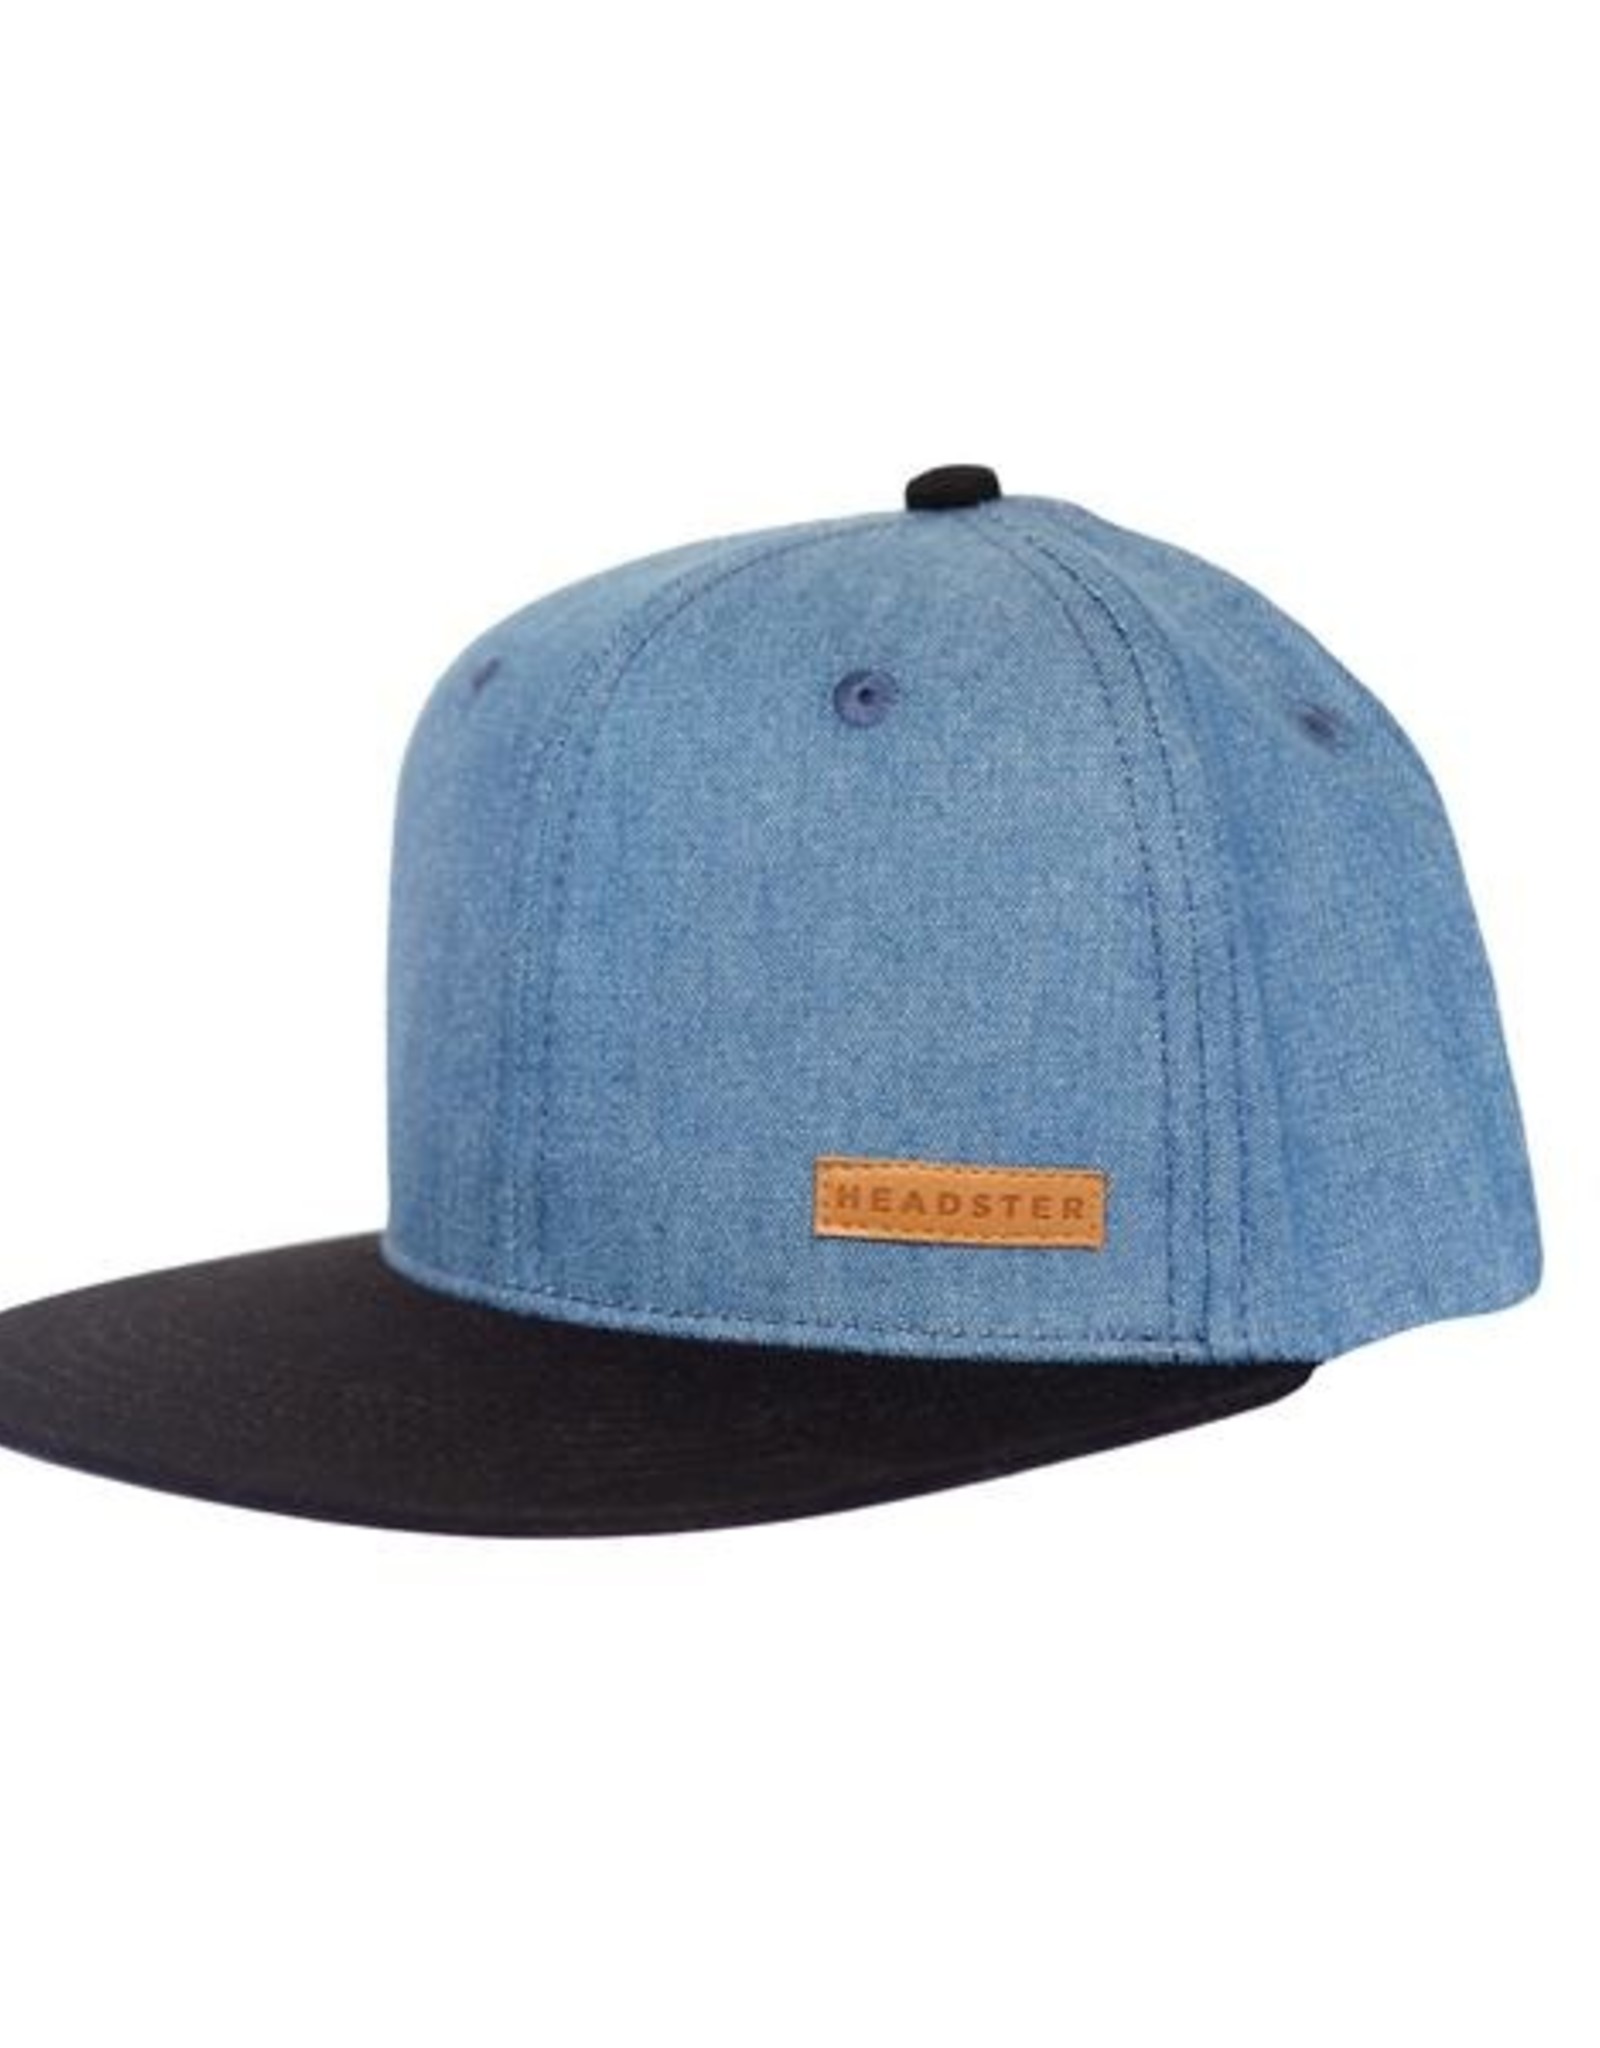 Headster Kids SP21 Jeany Blue Ball Cap